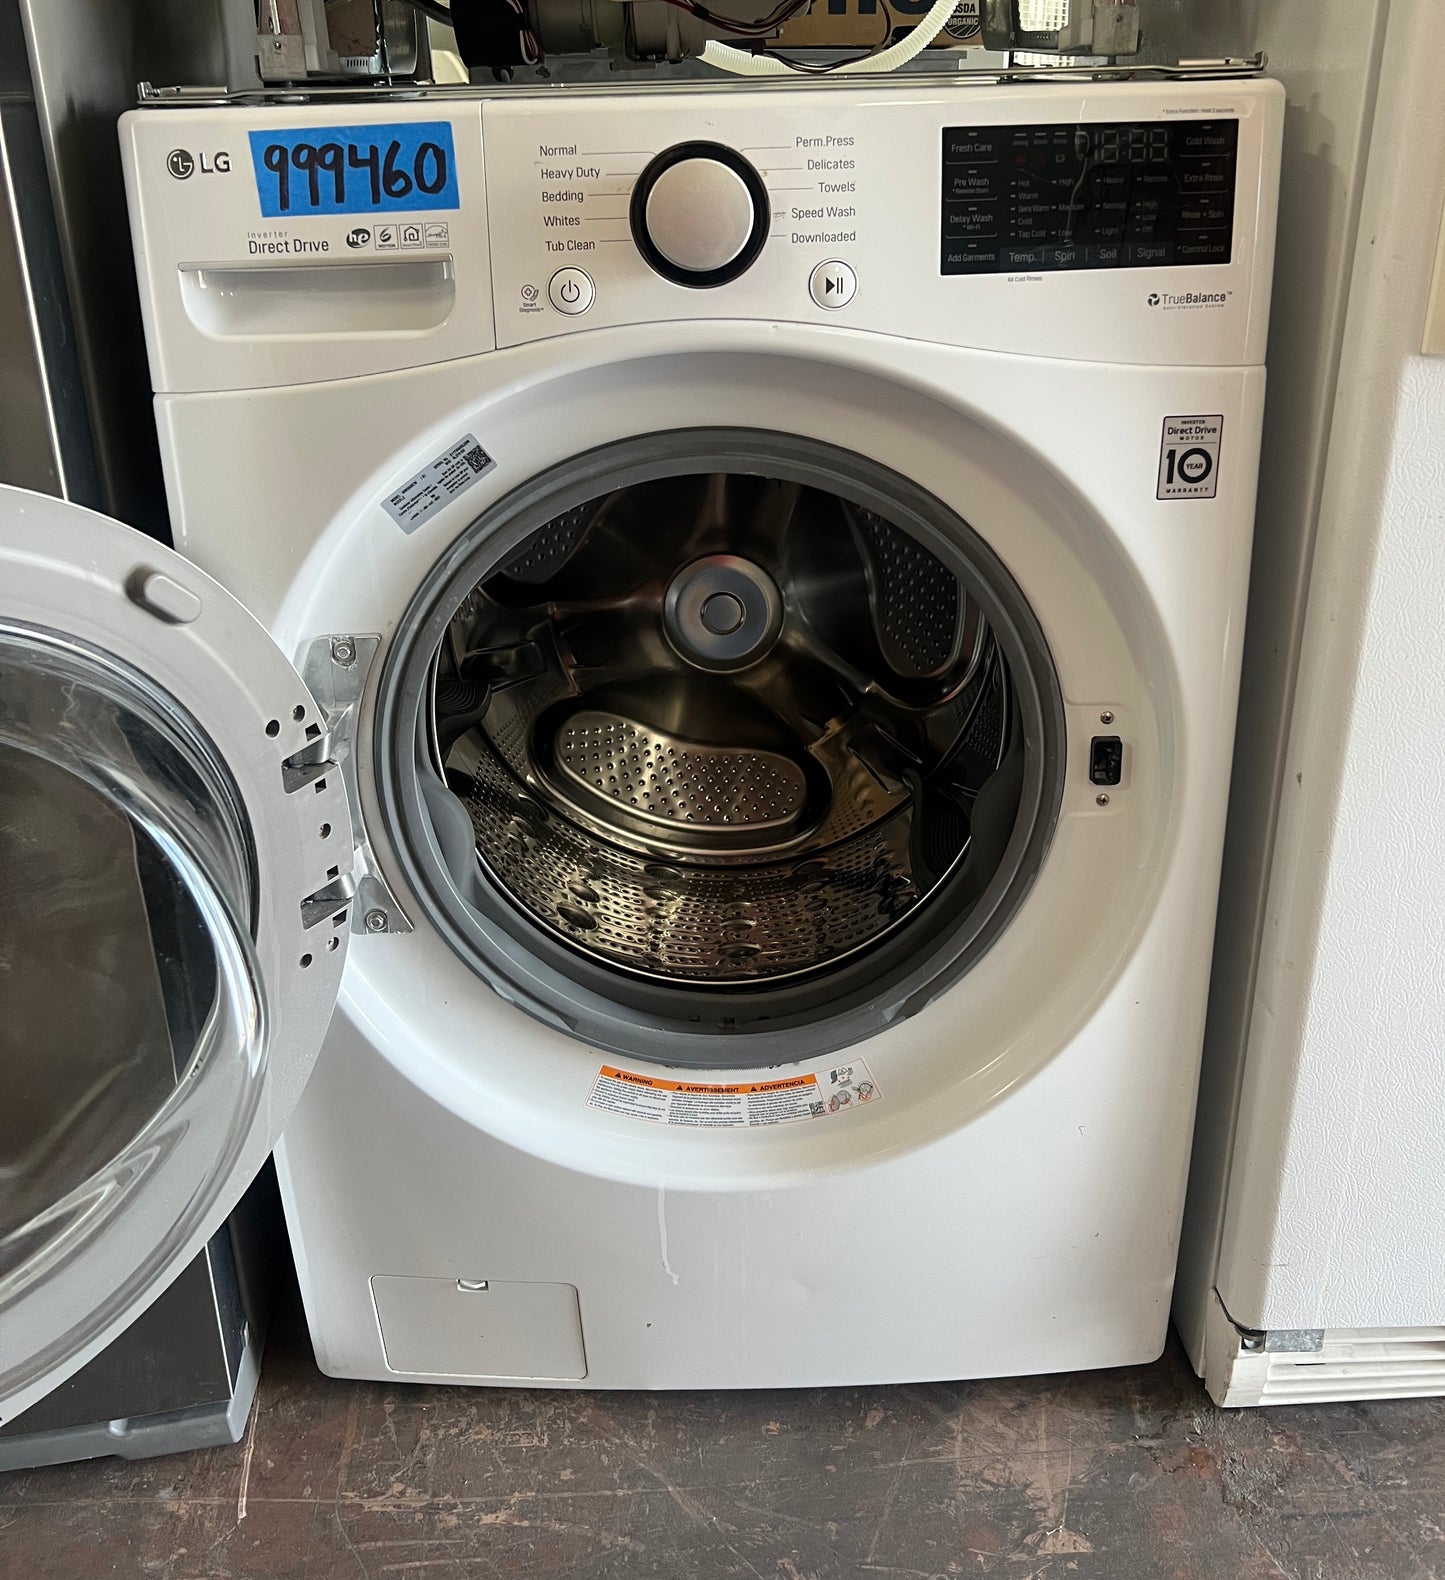 LG 4.5 CuFt Front Load Washer in White, WM3500CW, 999460